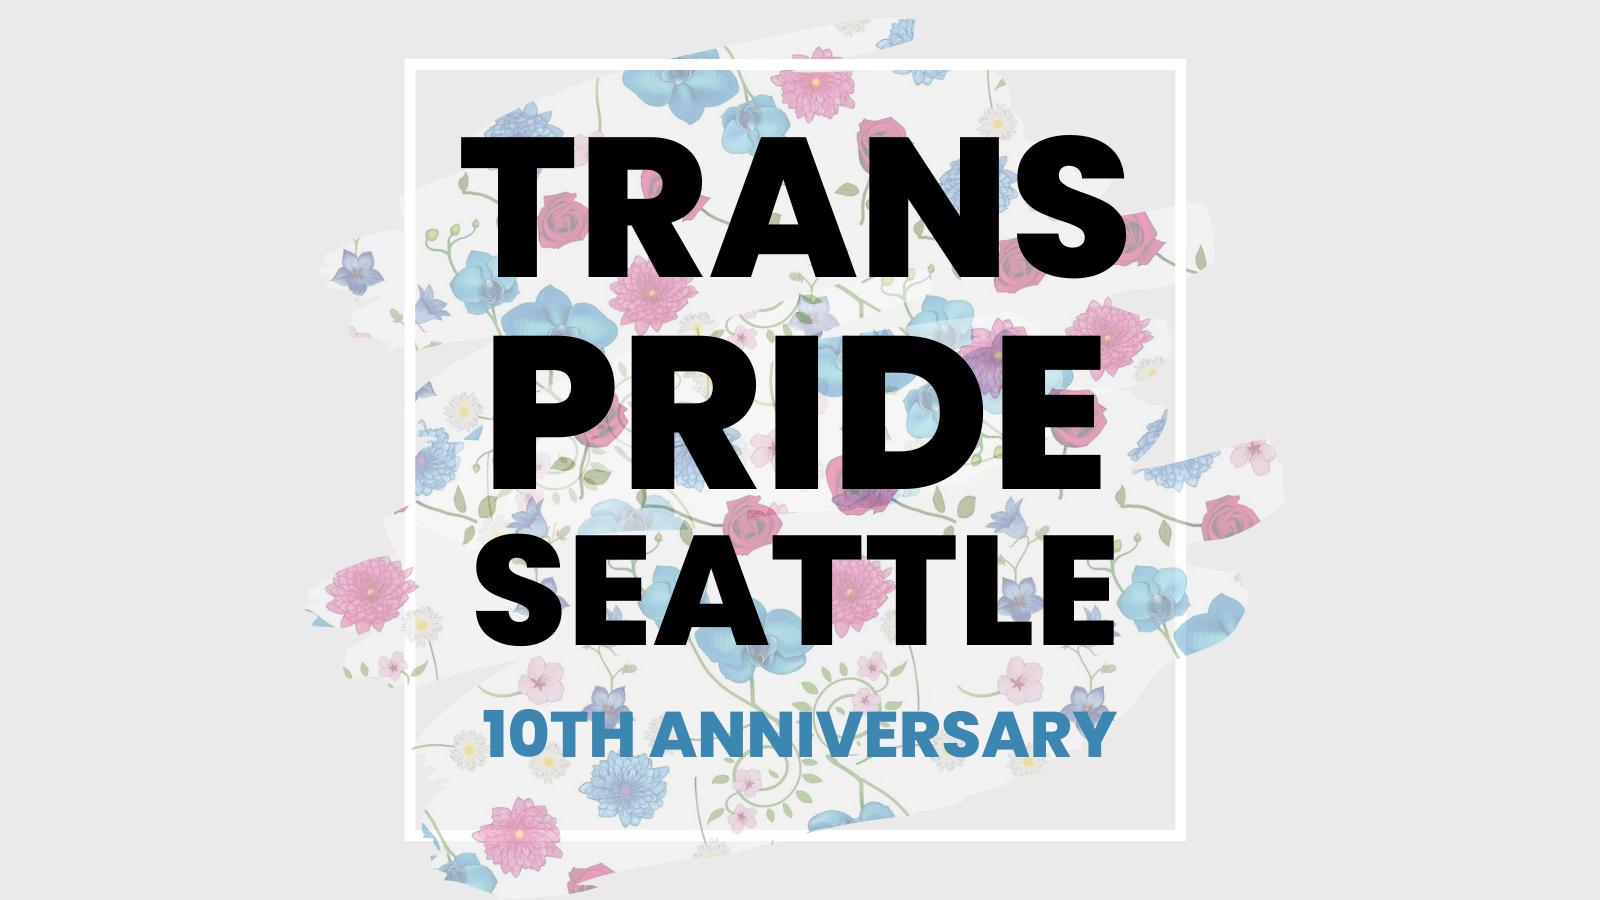 Banner of Trans pride seattle 10th anniversary with a background of lavendar and blue flowers